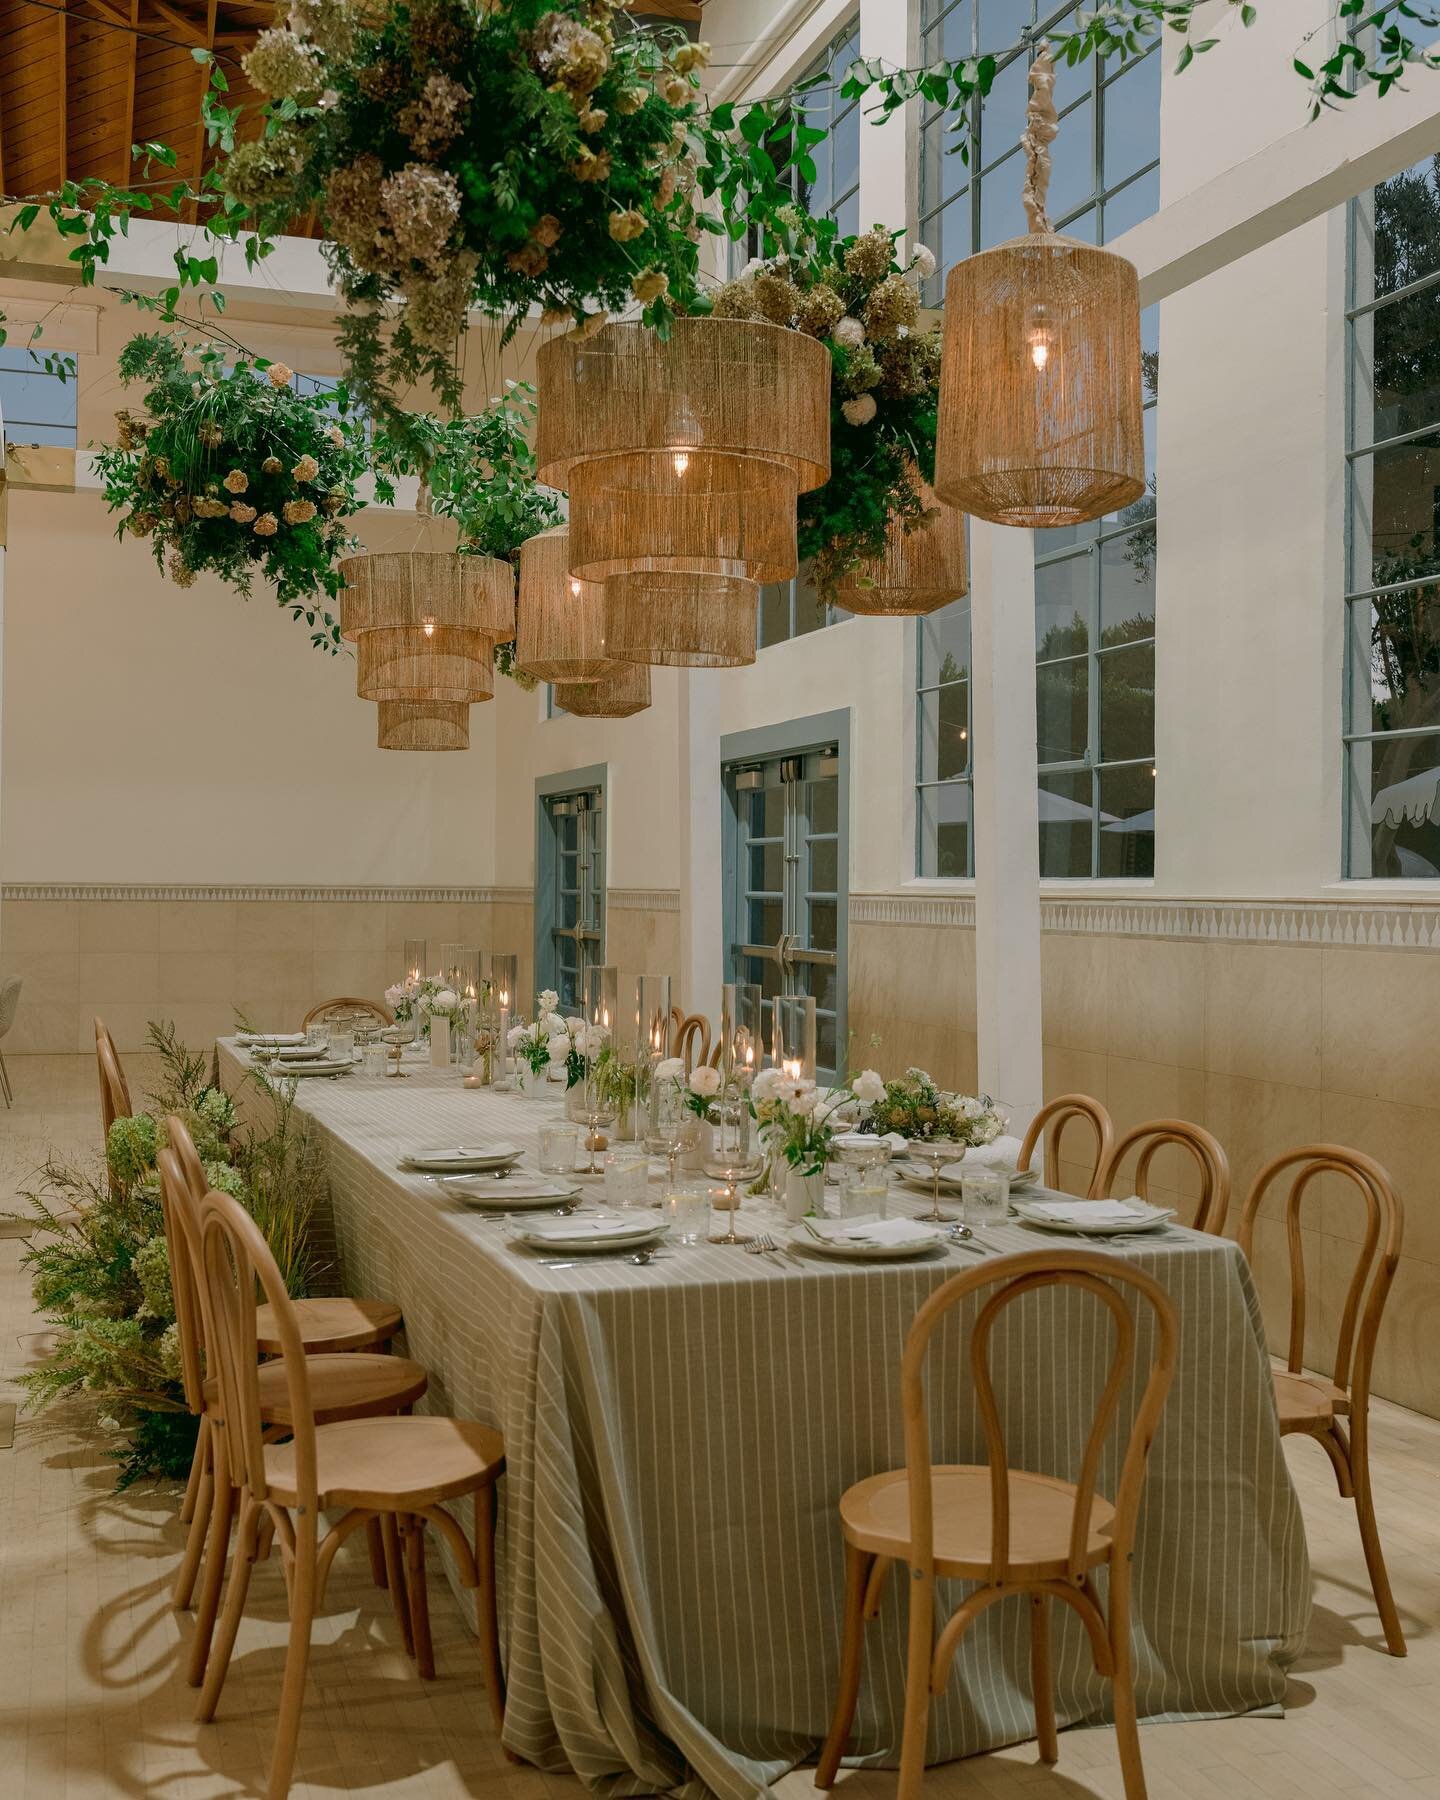 When the head table vibes are immaculate 😍 

Planning + Design: @fetelledesigns
Florals: @sweetfloraldreams
Photography + Videography: @theauthenticstorytellers
Venue: @grandgimeno 
Catering + Bar: @jayscatering
Content Creator: @cupidcontentco
Rent